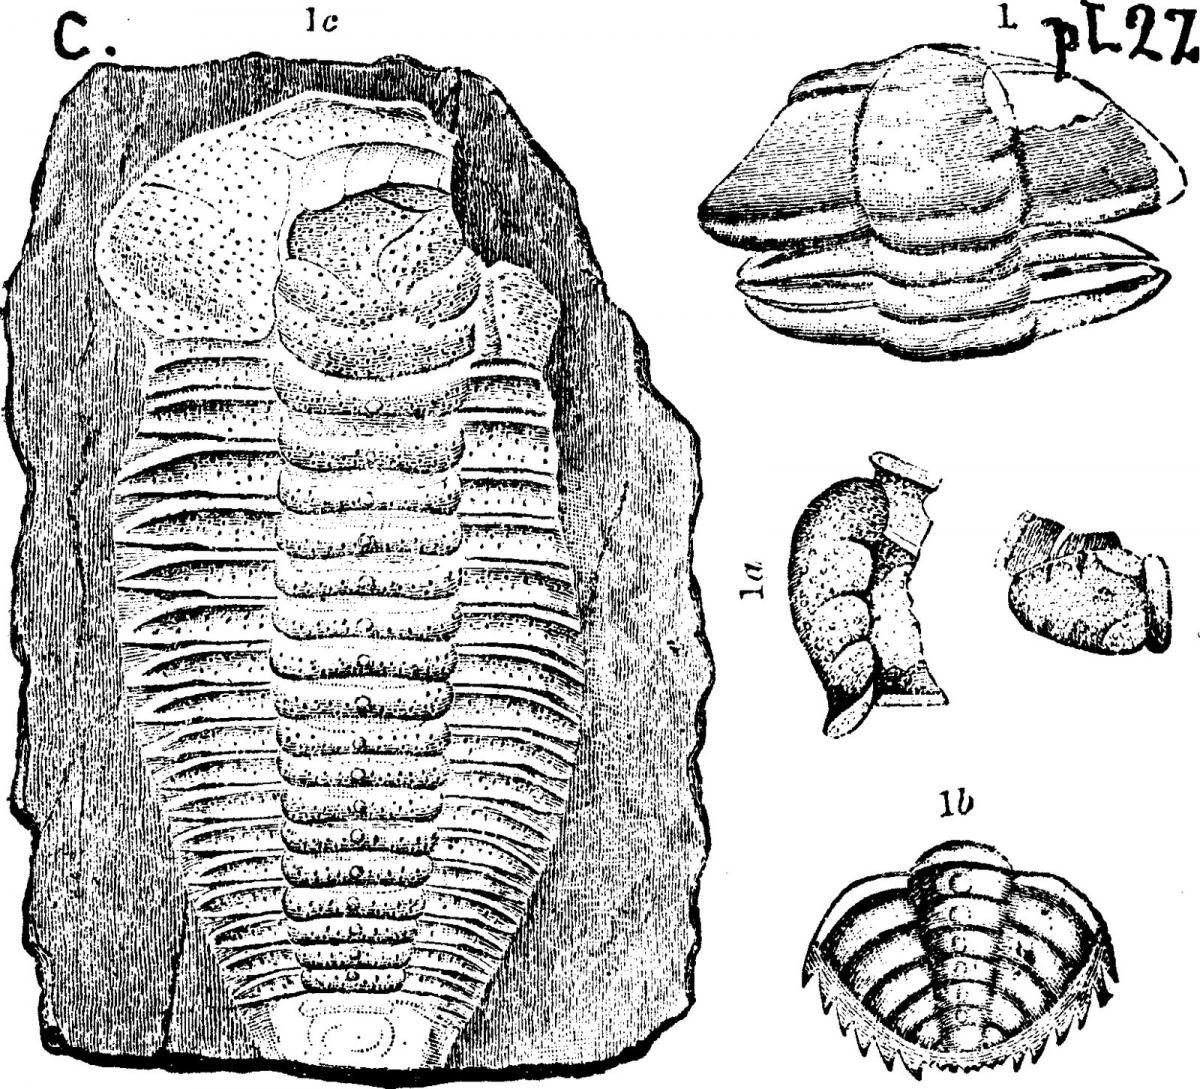 A black and white illustration of a trilobite fossil